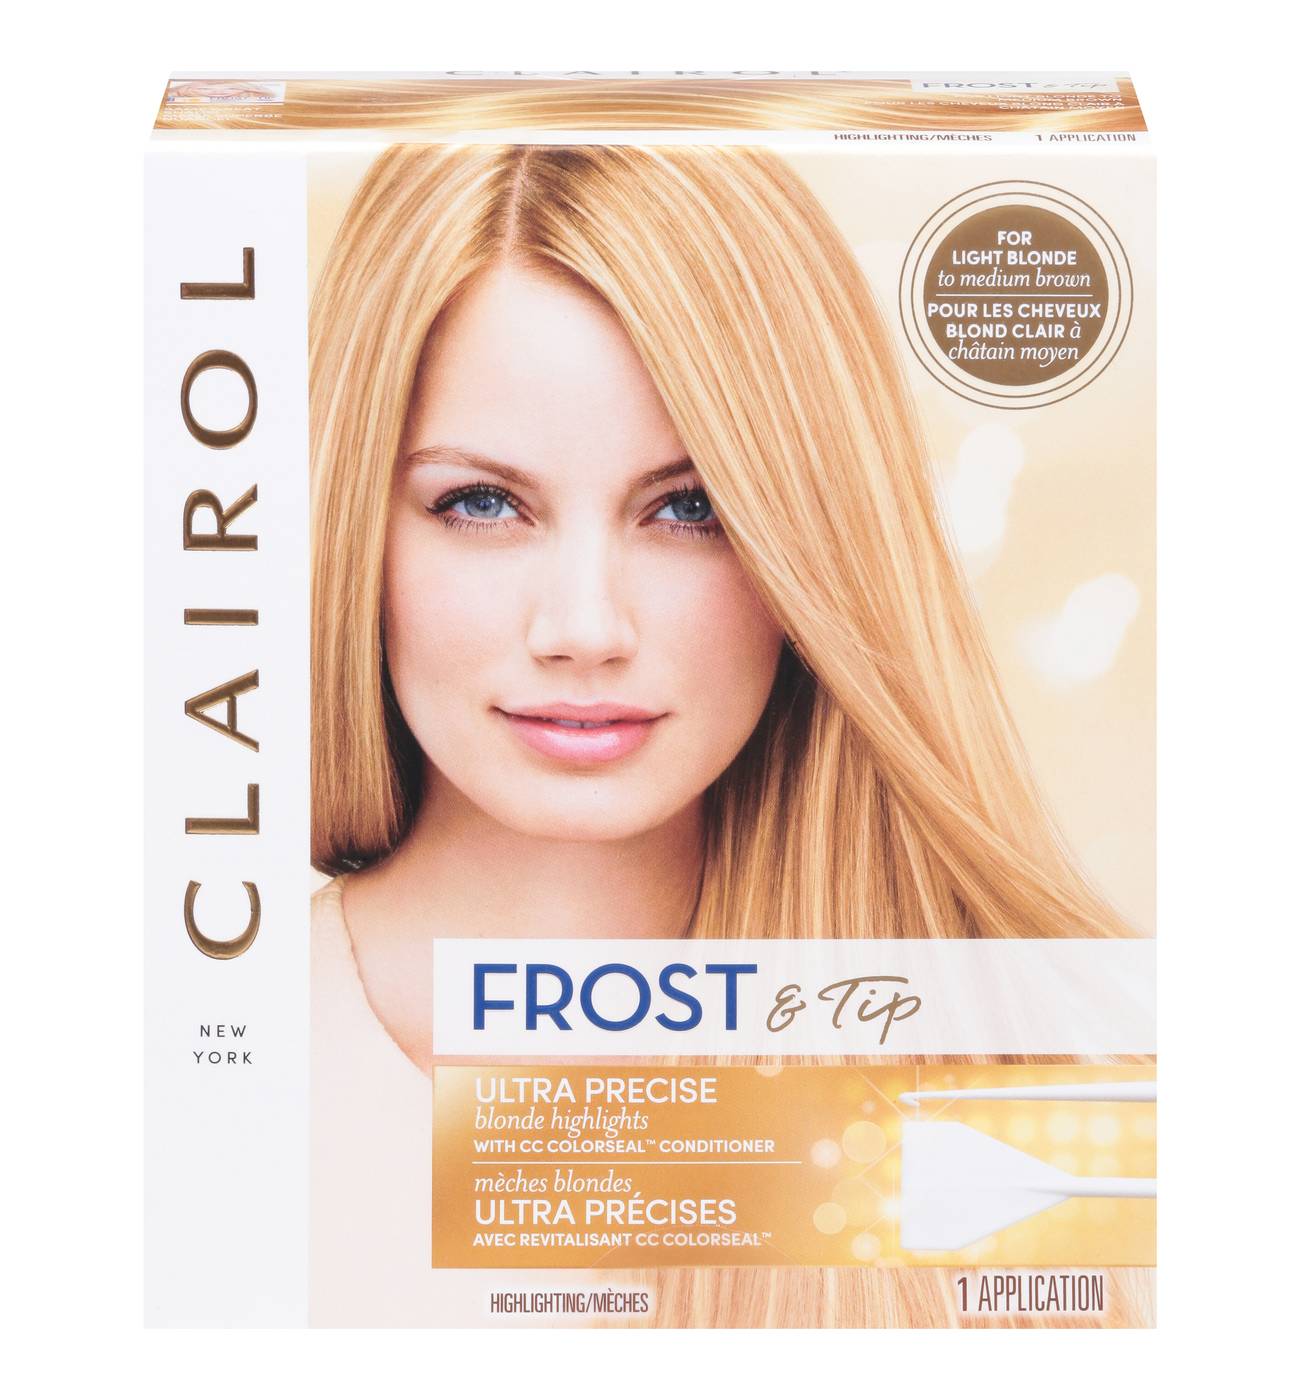 Clairol Frost & Tip Ultra Precise Blonde Highlights for Light Blonde/Medium Brown; image 1 of 3